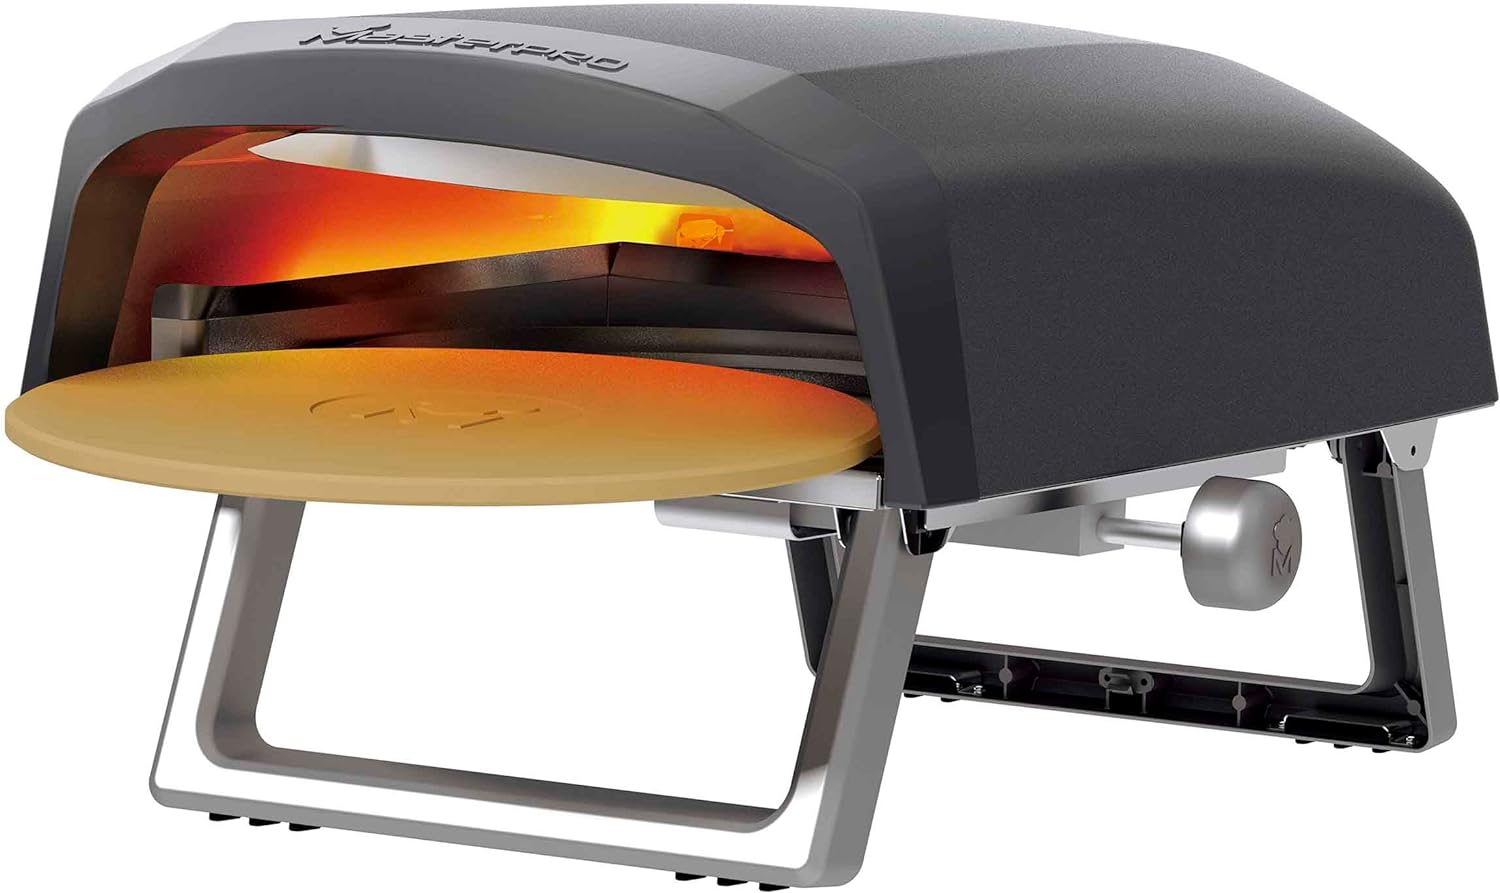 MasterPRO Napoli Gas Pizza Oven with Rotating Function for Even Heat Distribution - Power up to 500 °C - Pizza in 60 Seconds - Carry Bag and Stone Tray Included